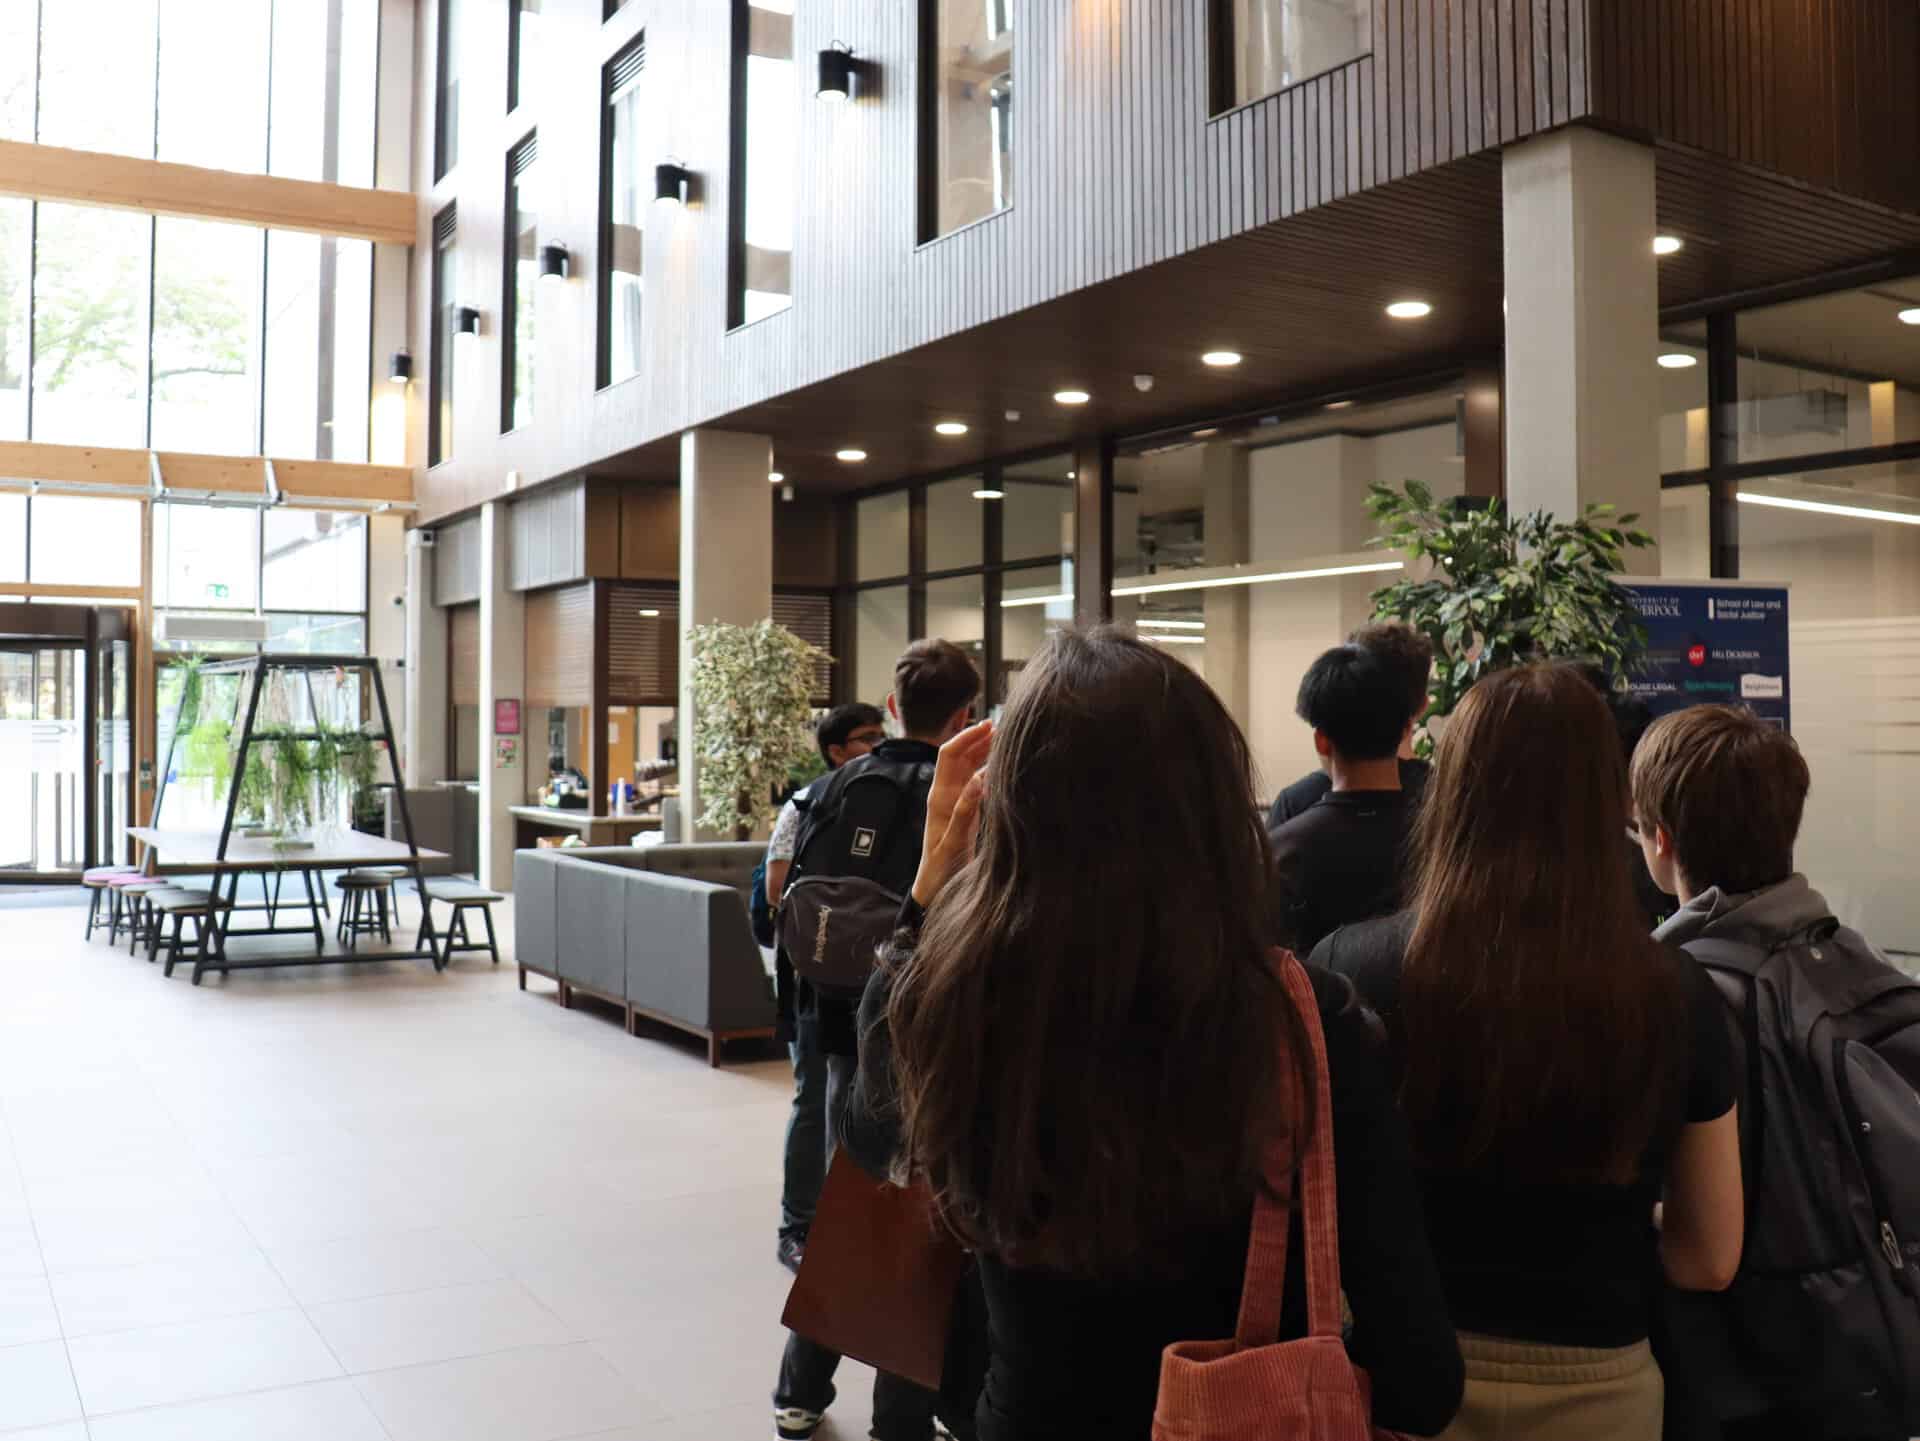 Laurus Trust students visit the School of Law and Social Sciences building on a guided tour of Liverpool University.